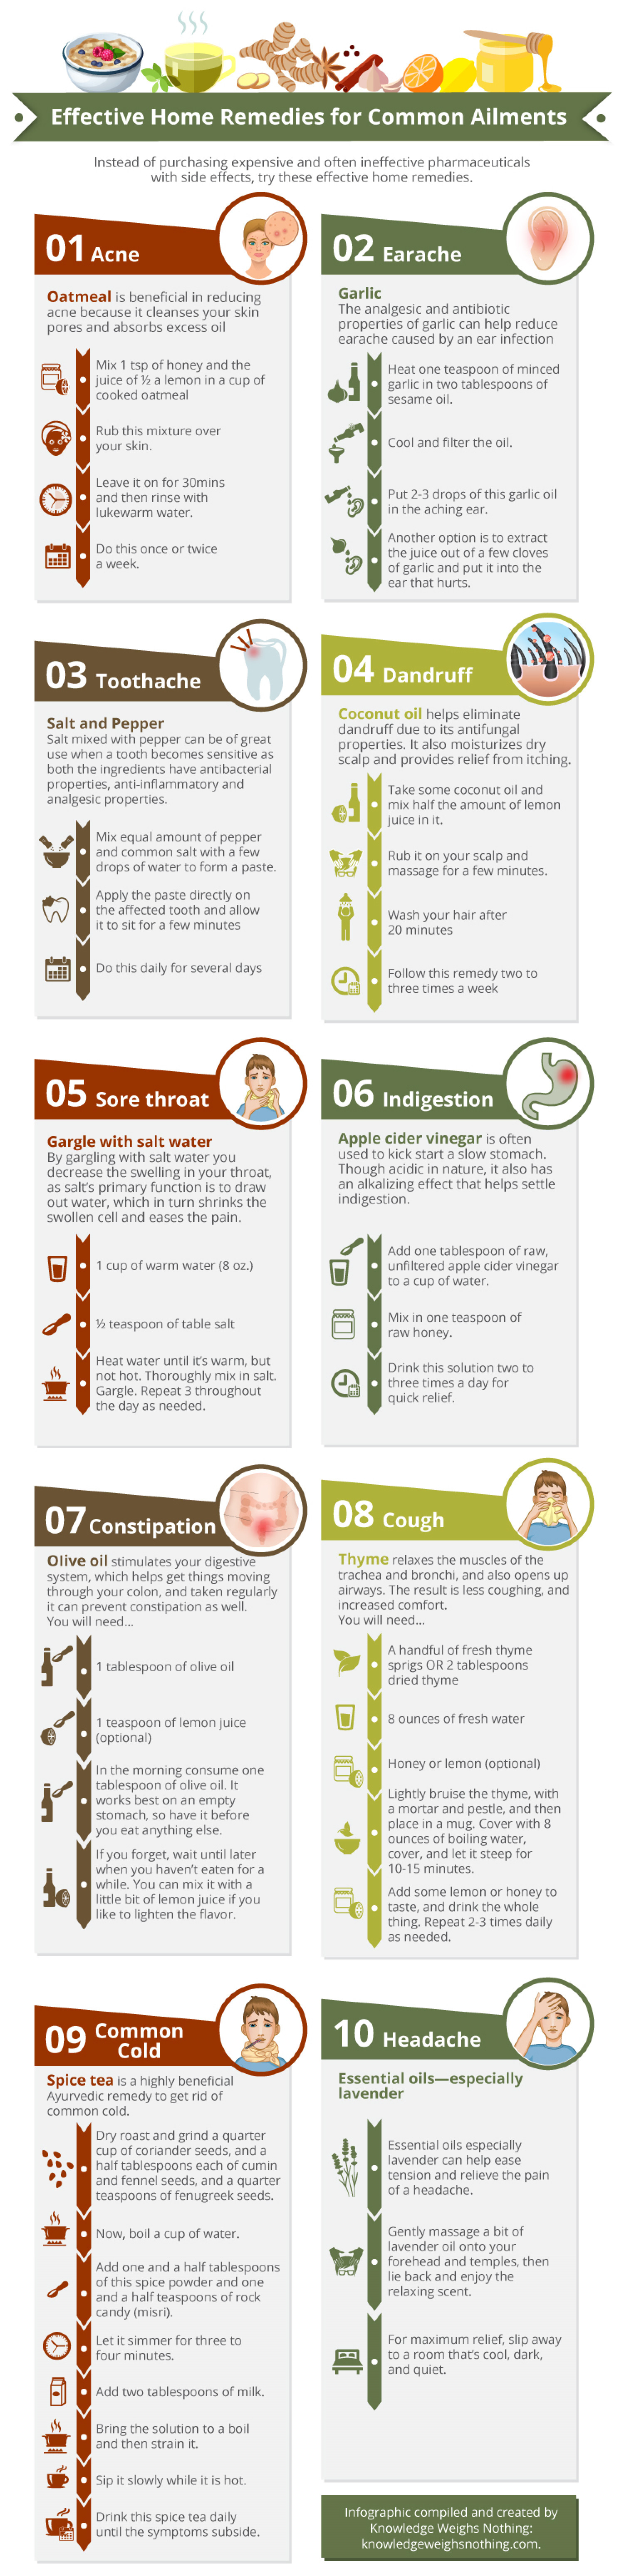 Effective Home Remedies for Common Ailments Infographic